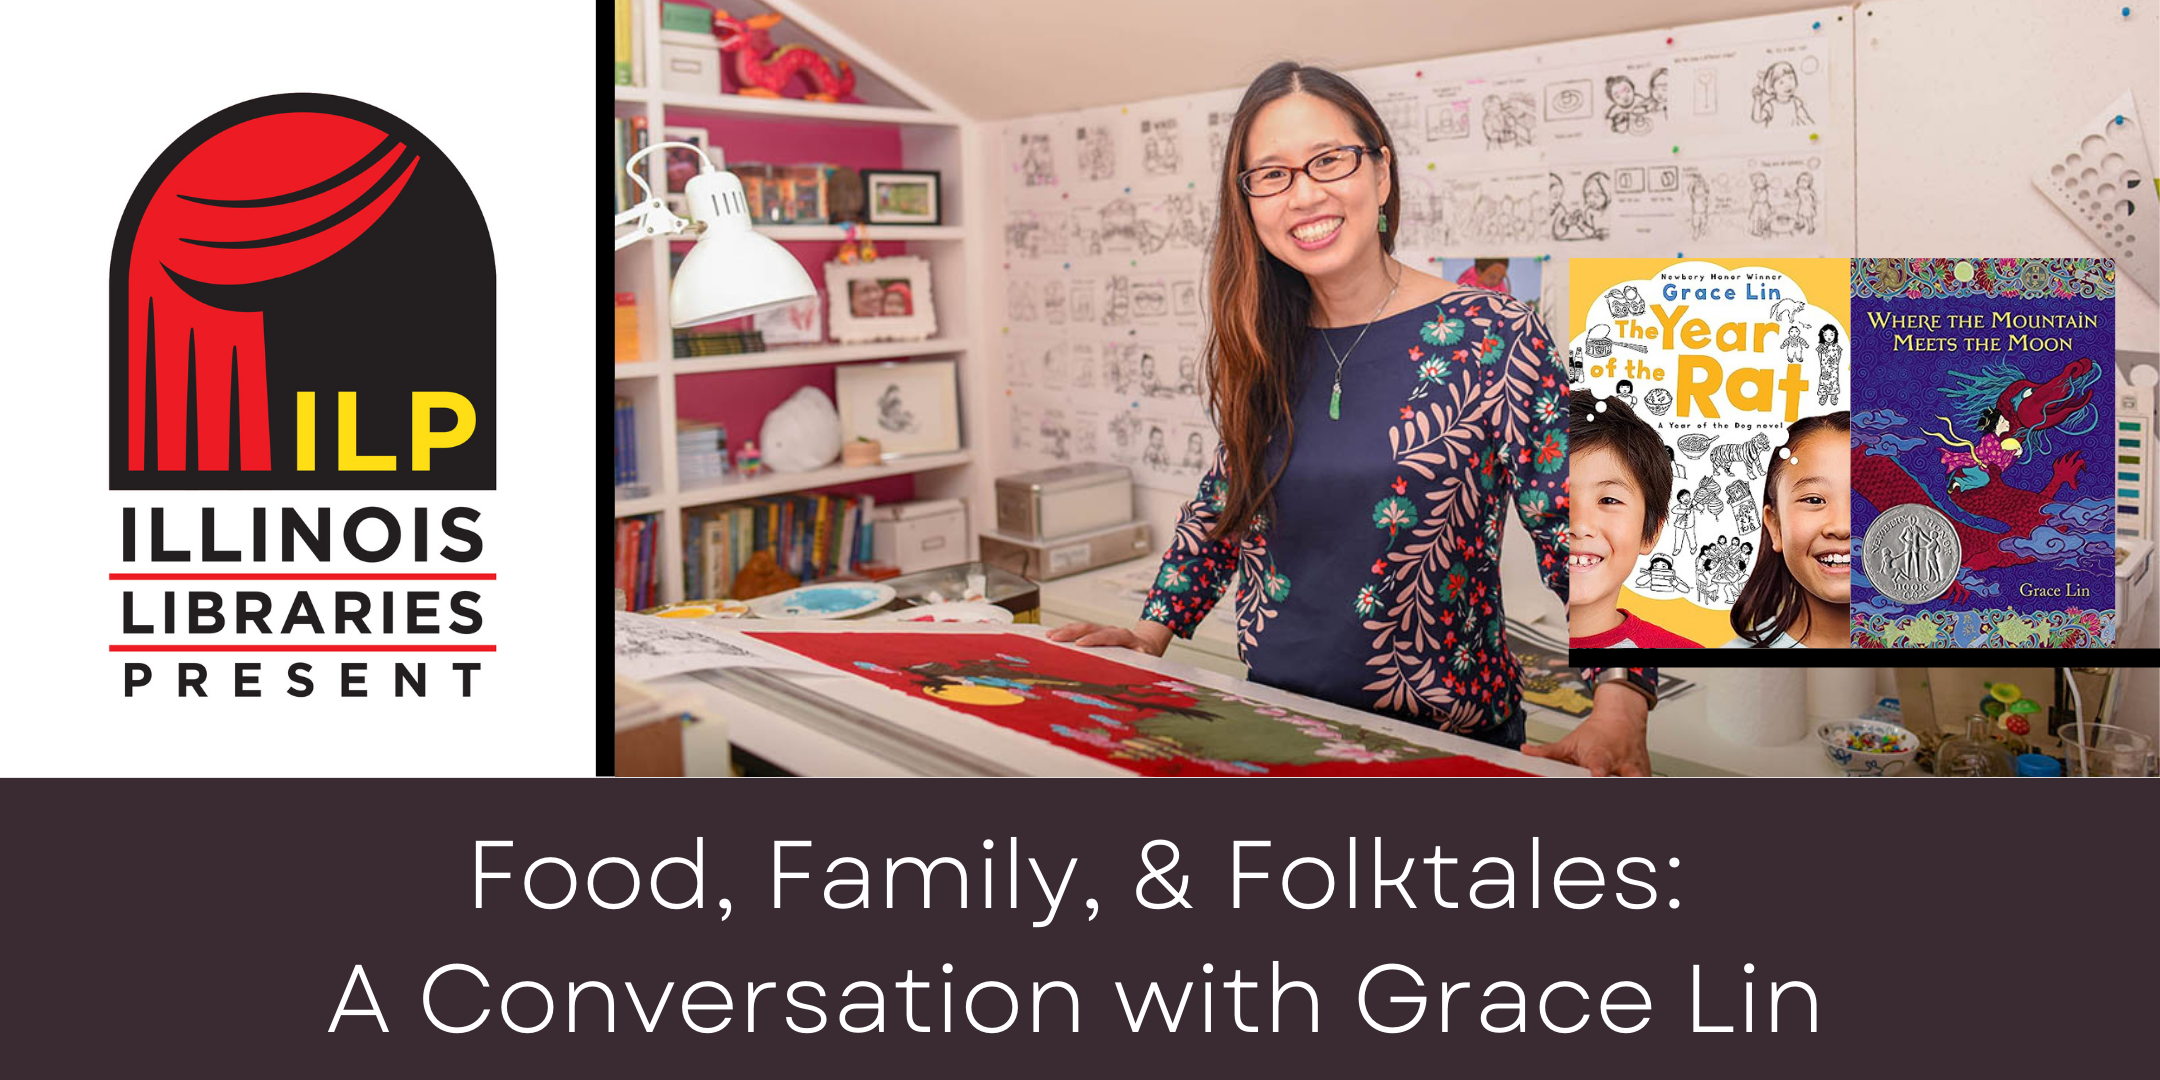 image of "Food, Family, & Folktales: A Conversation with Grace Lin"